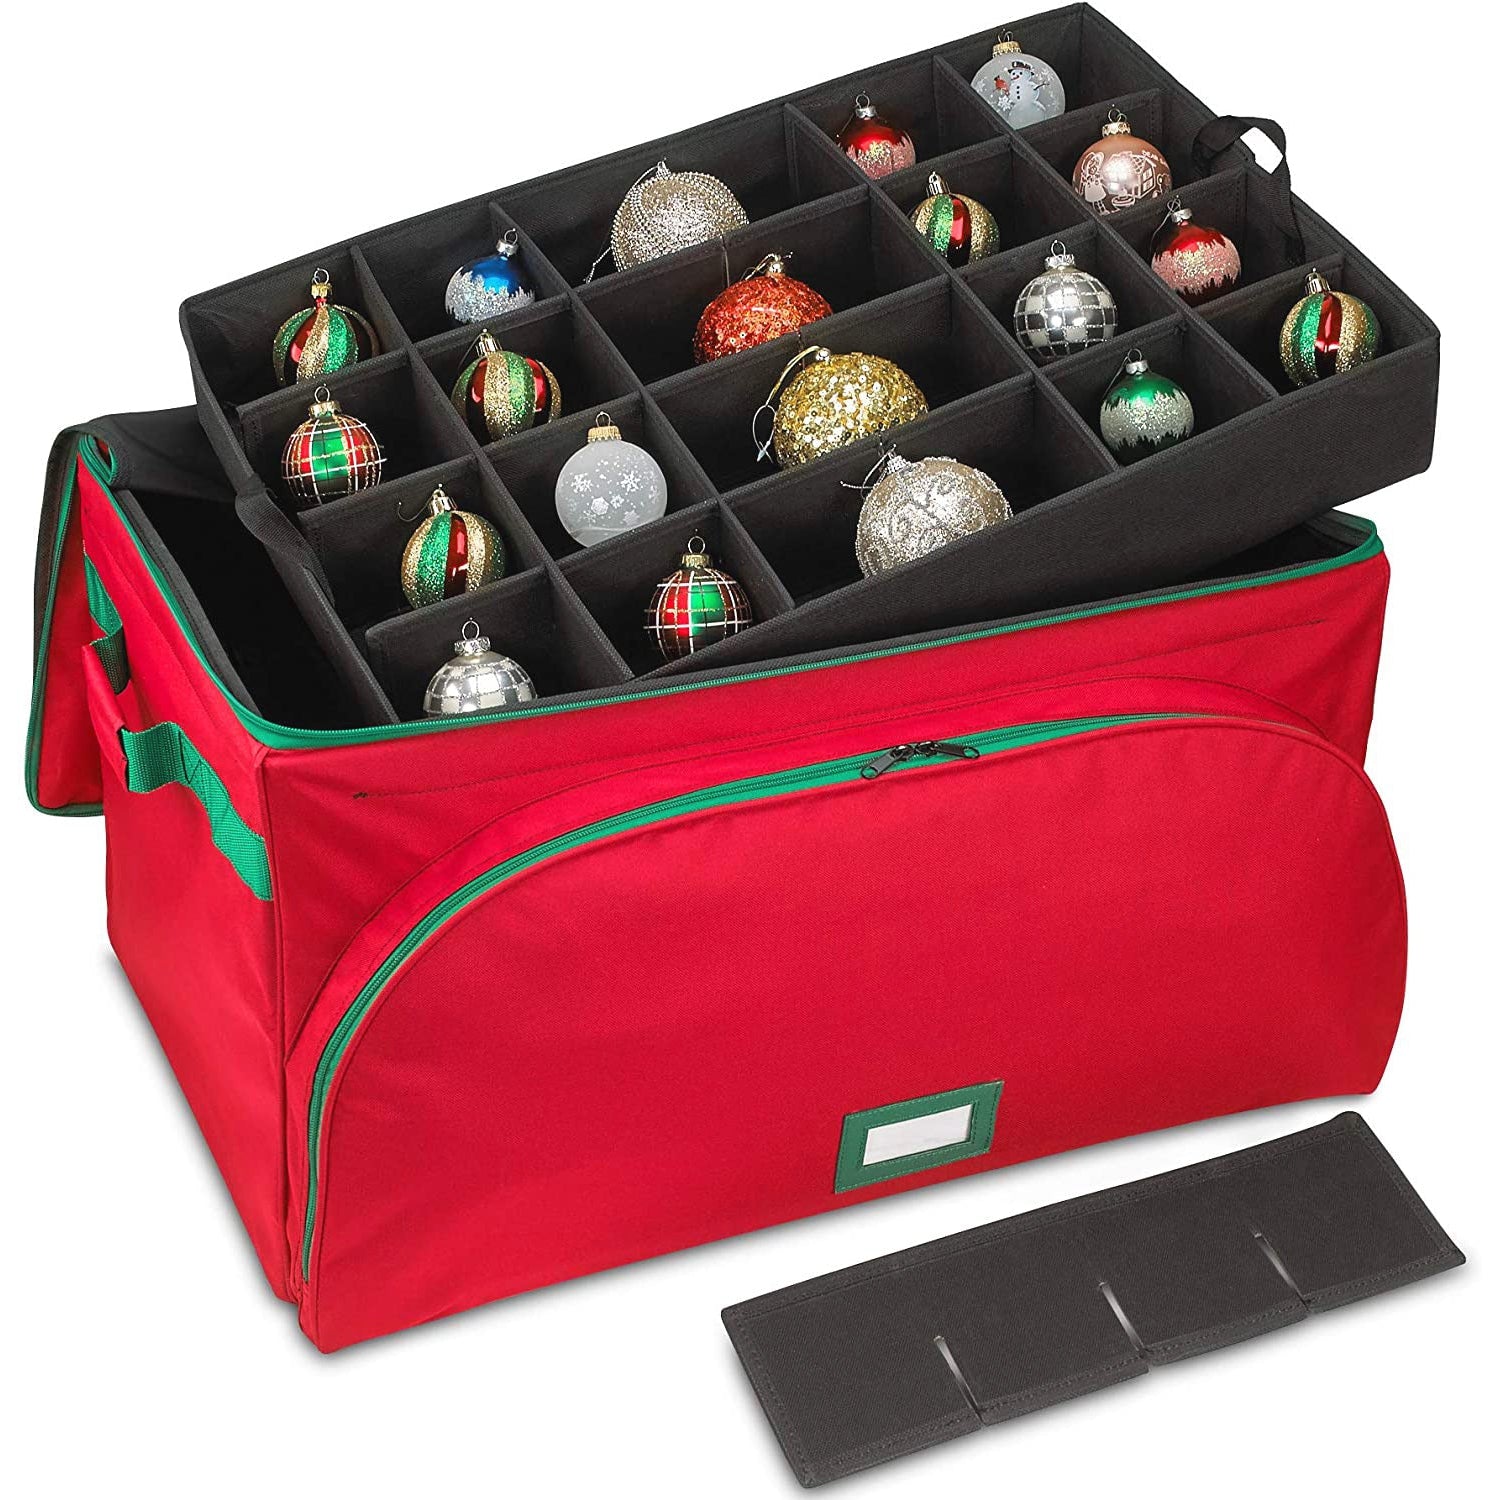 Christmas Ornament Storage Containers – Holds Up to 72- 4” ornaments Durable 600D Fabric - Adjustable Dividers - 3 Individual Trays – Metal Frame